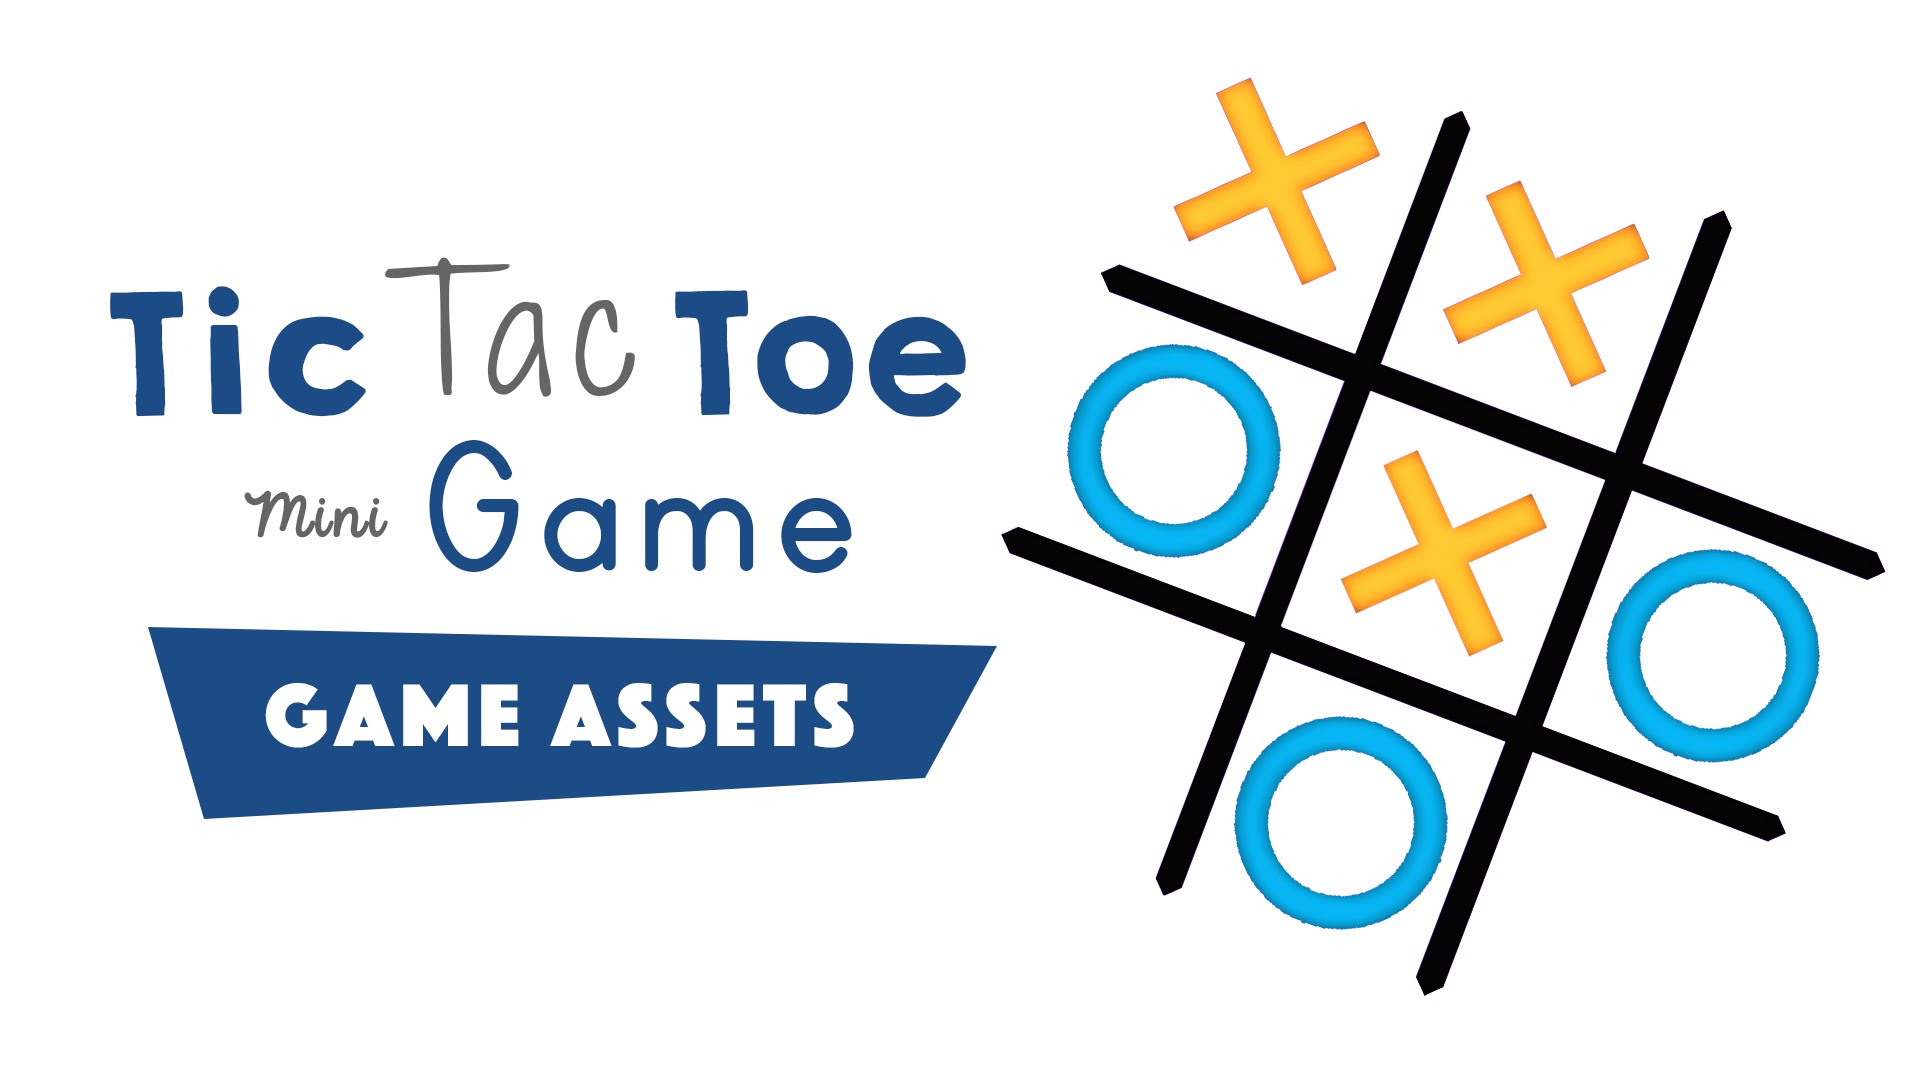 Blender 3D: TicTacToe Mini Game (Game Assets) - YouTube